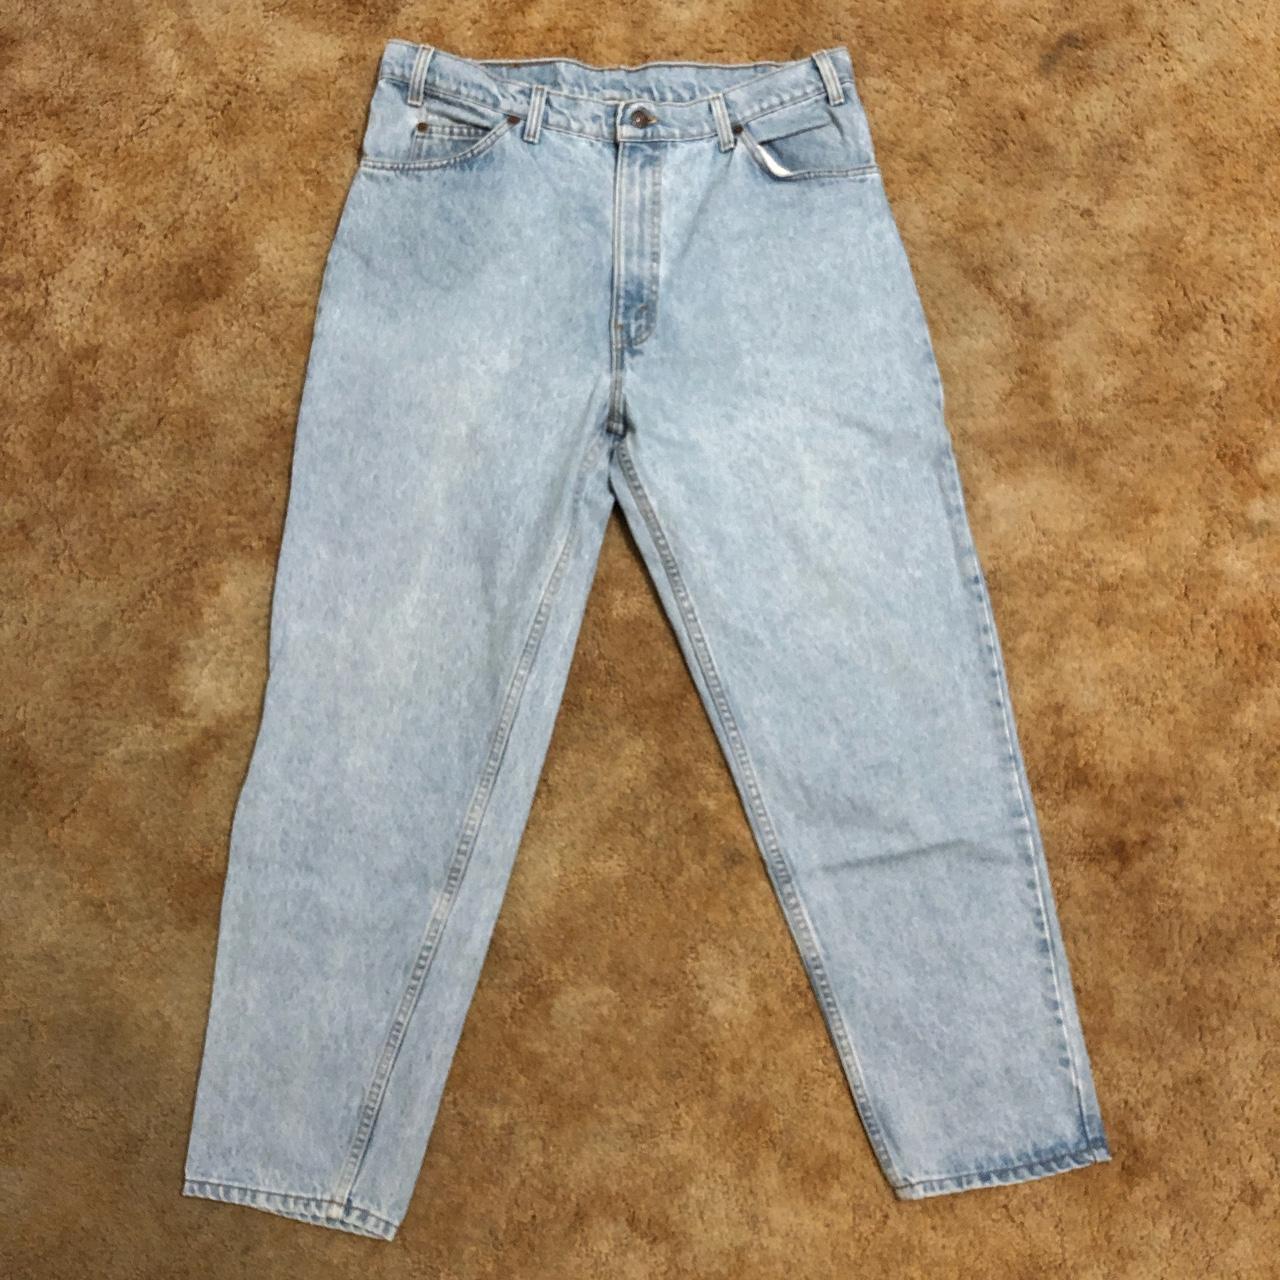 Early 90’s 550 orange tab Levi’s. No rips or... - Depop